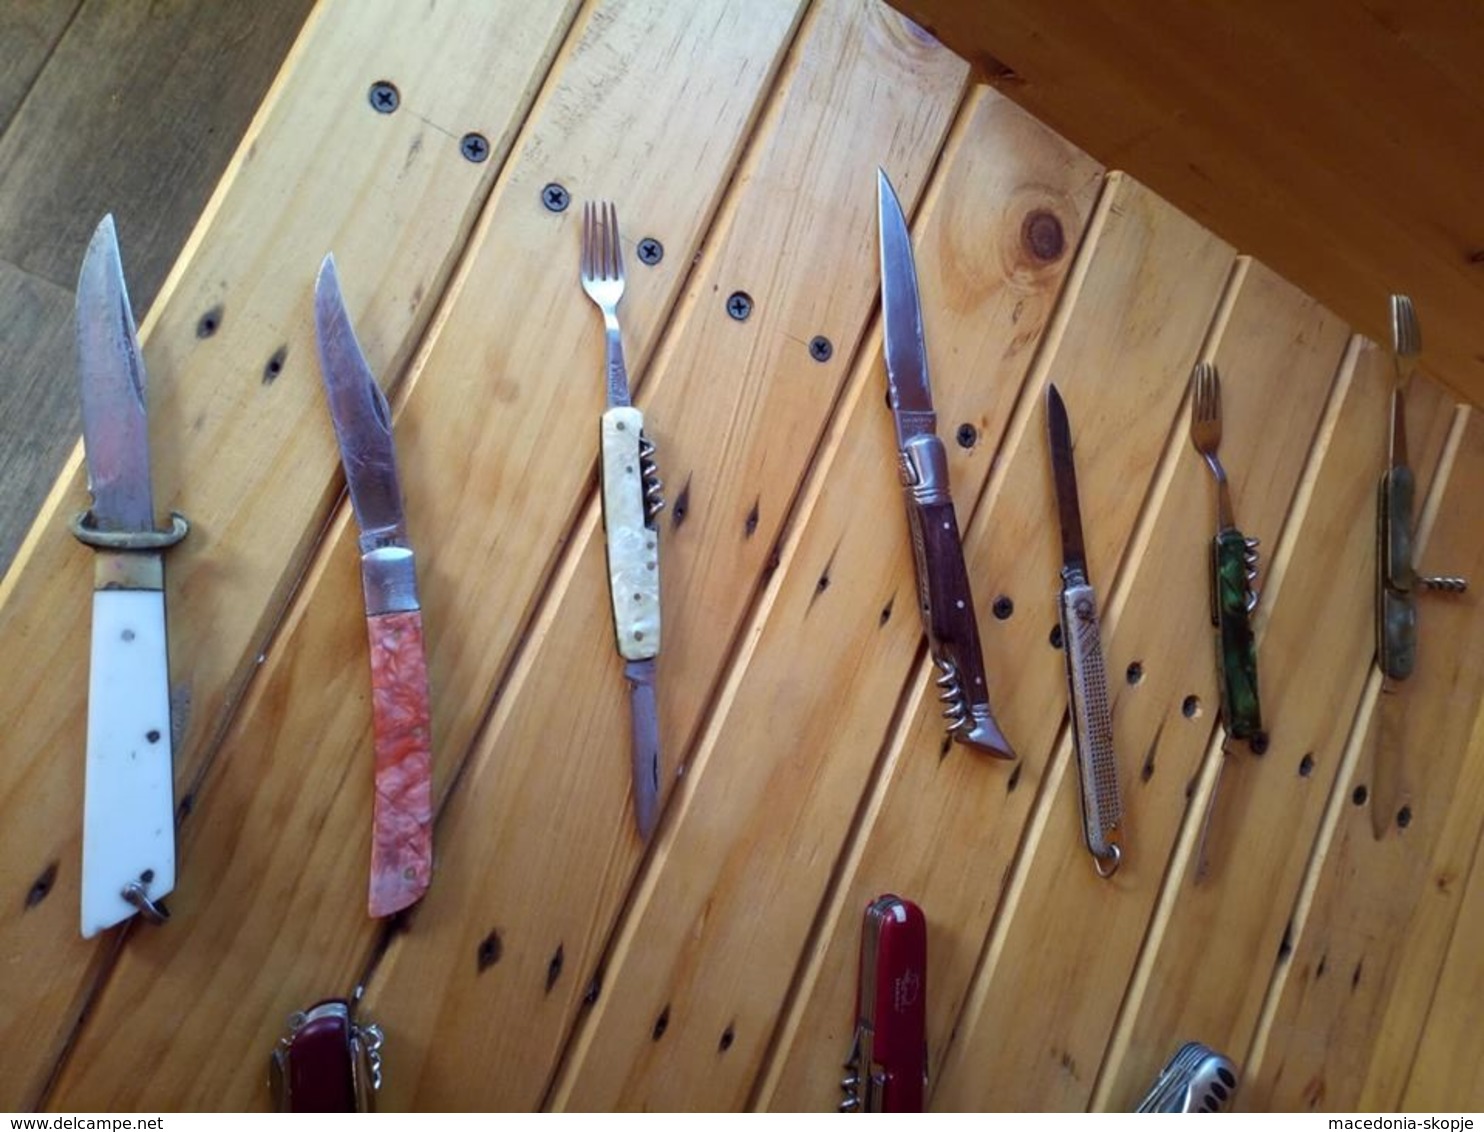 BIG LOT -Old  Pocket Knifes - Knives - Famous Brands- All Knives Are Right And Well Preserved. True Collector Samples - Knives/Swords